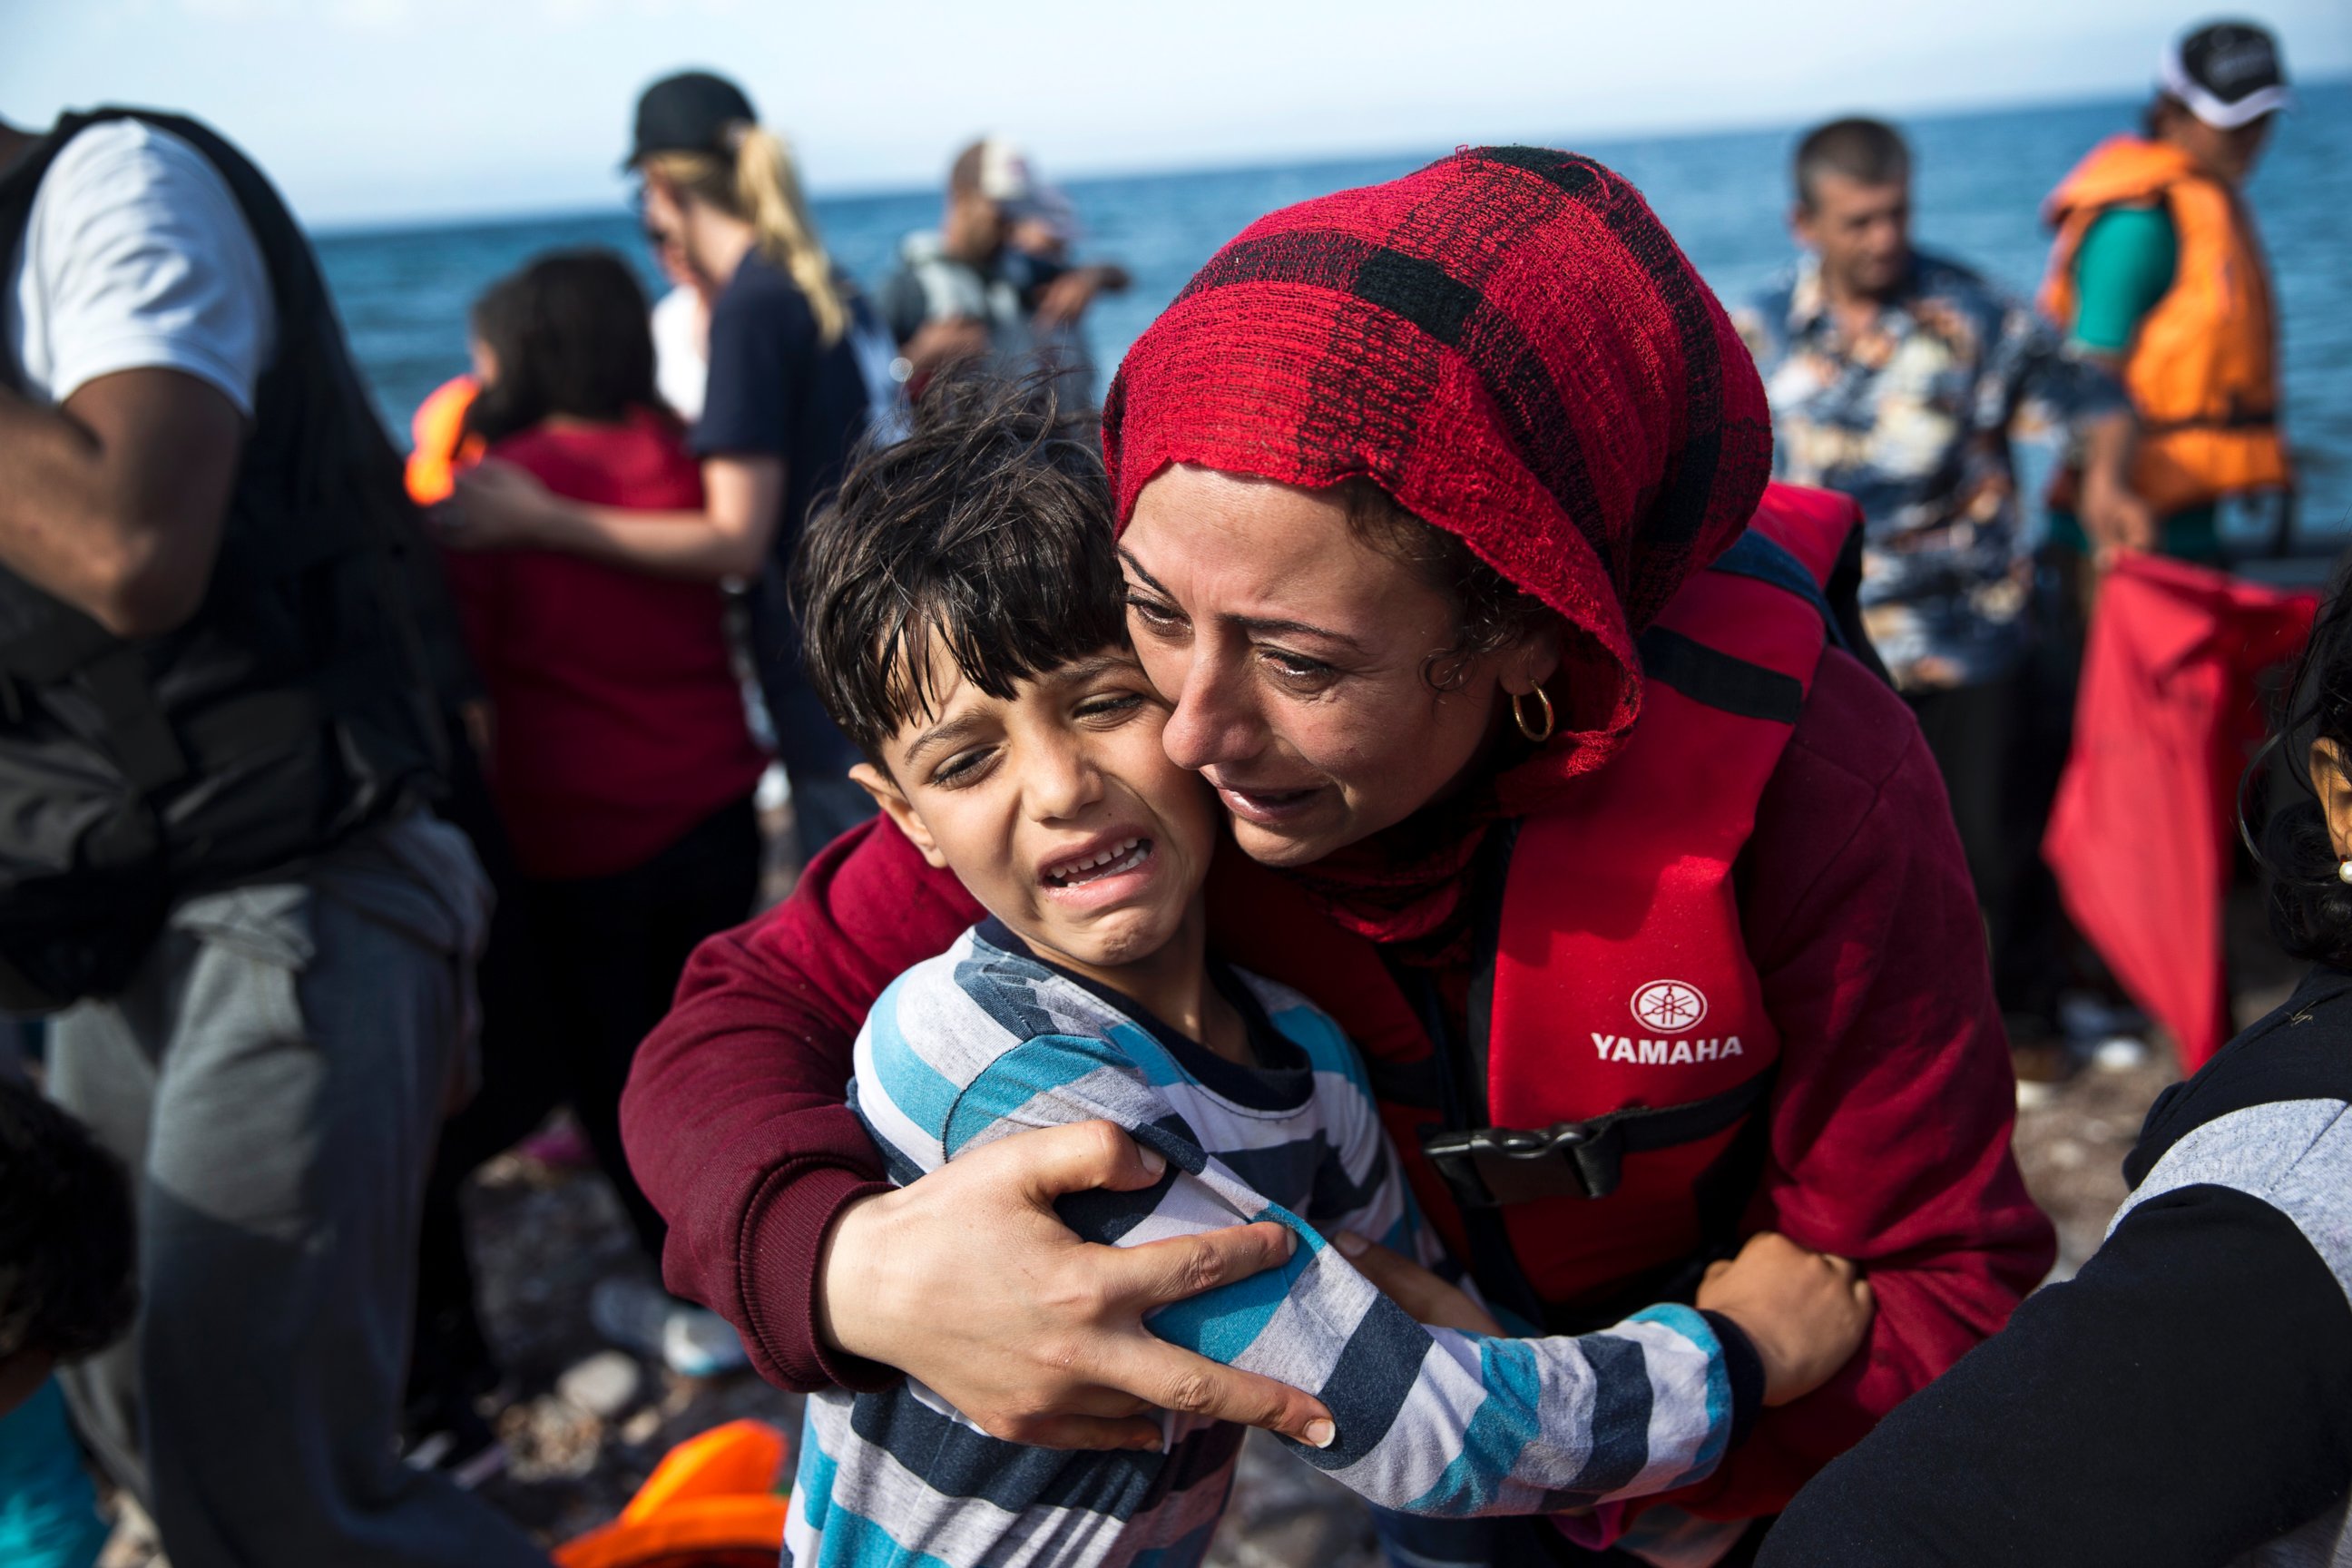 PHOTO:A Syrian woman embraces her child after they arrived with others refugees on a dinghy from Turkey to Lesbos island, Greece, Sept. 11, 2015. 